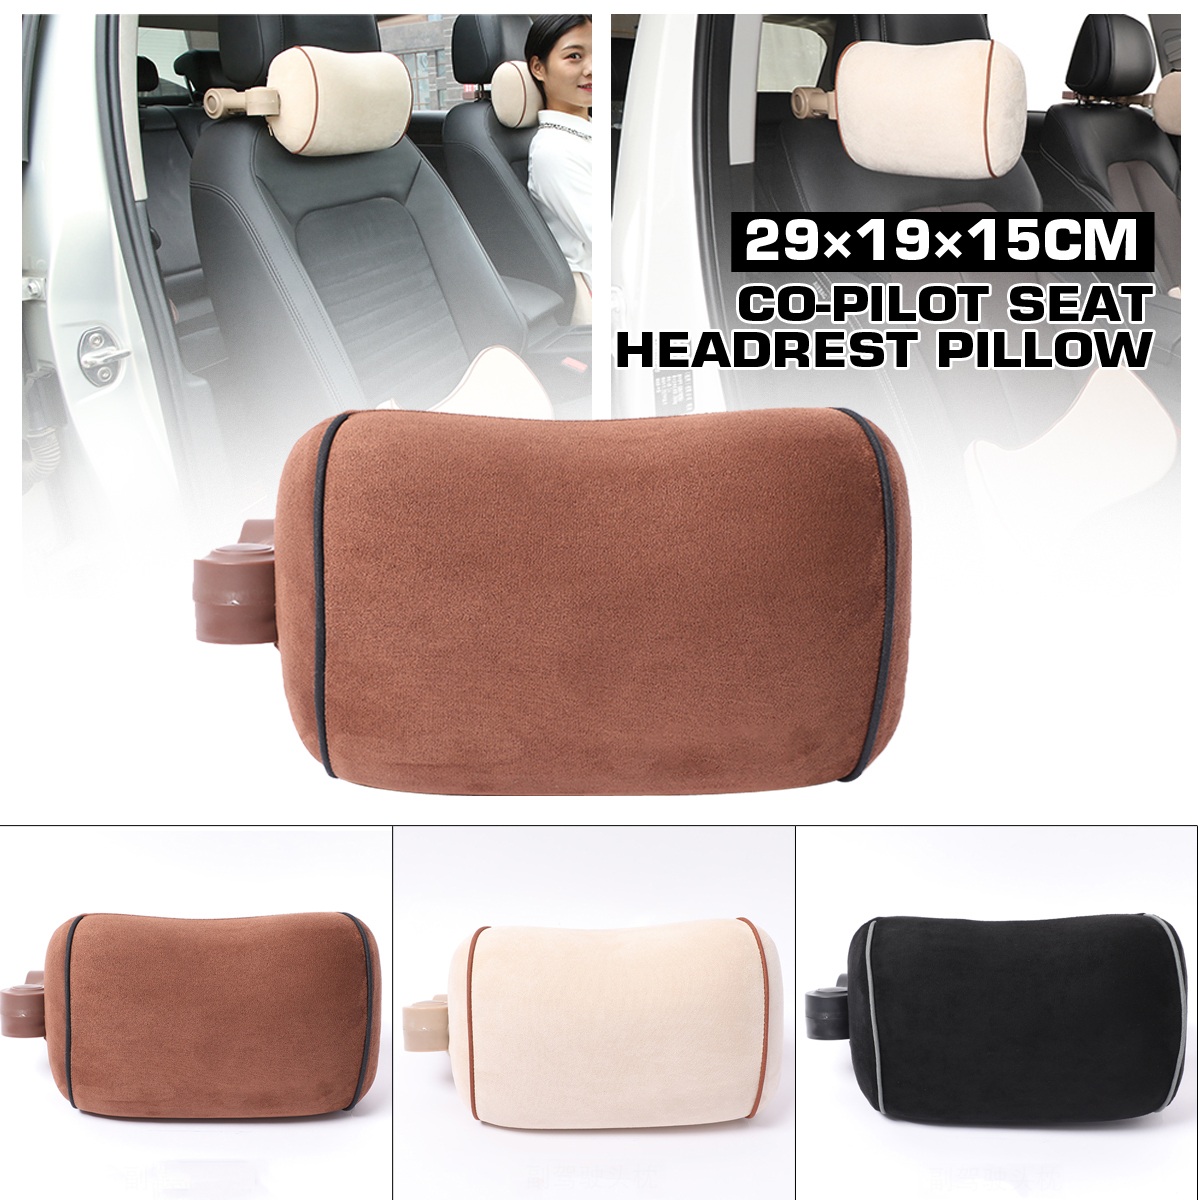 291915cm-Cervical-Multifunctional-Child-Adult-Travel-Car-Right-Seat-U-shaped-Neck-Pillow-Headrest-1784627-1